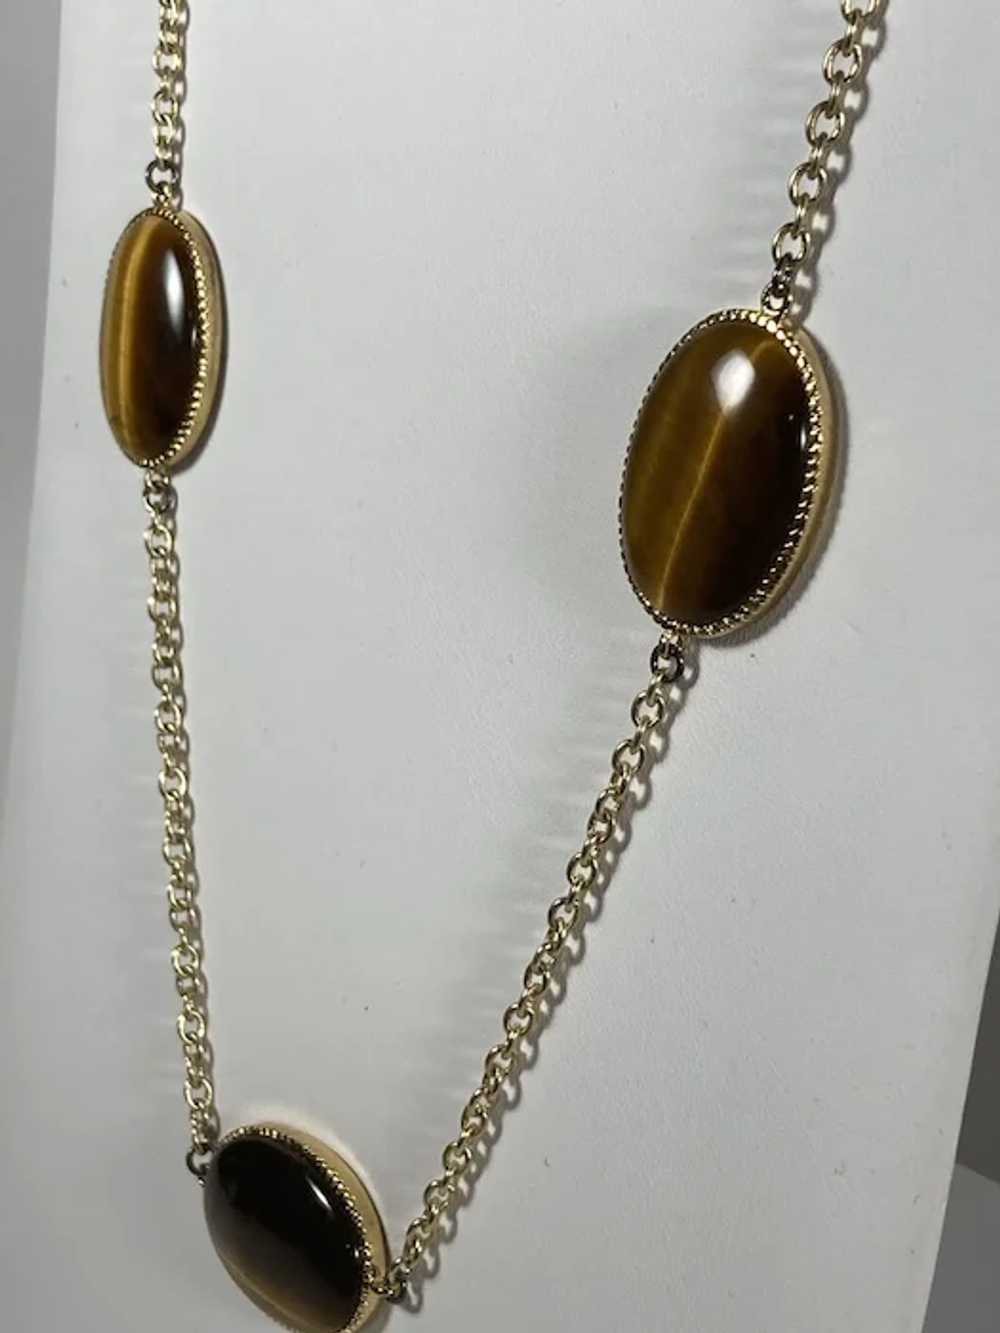 Tiger's Eye Ovals on Gold Tone Chain - image 3